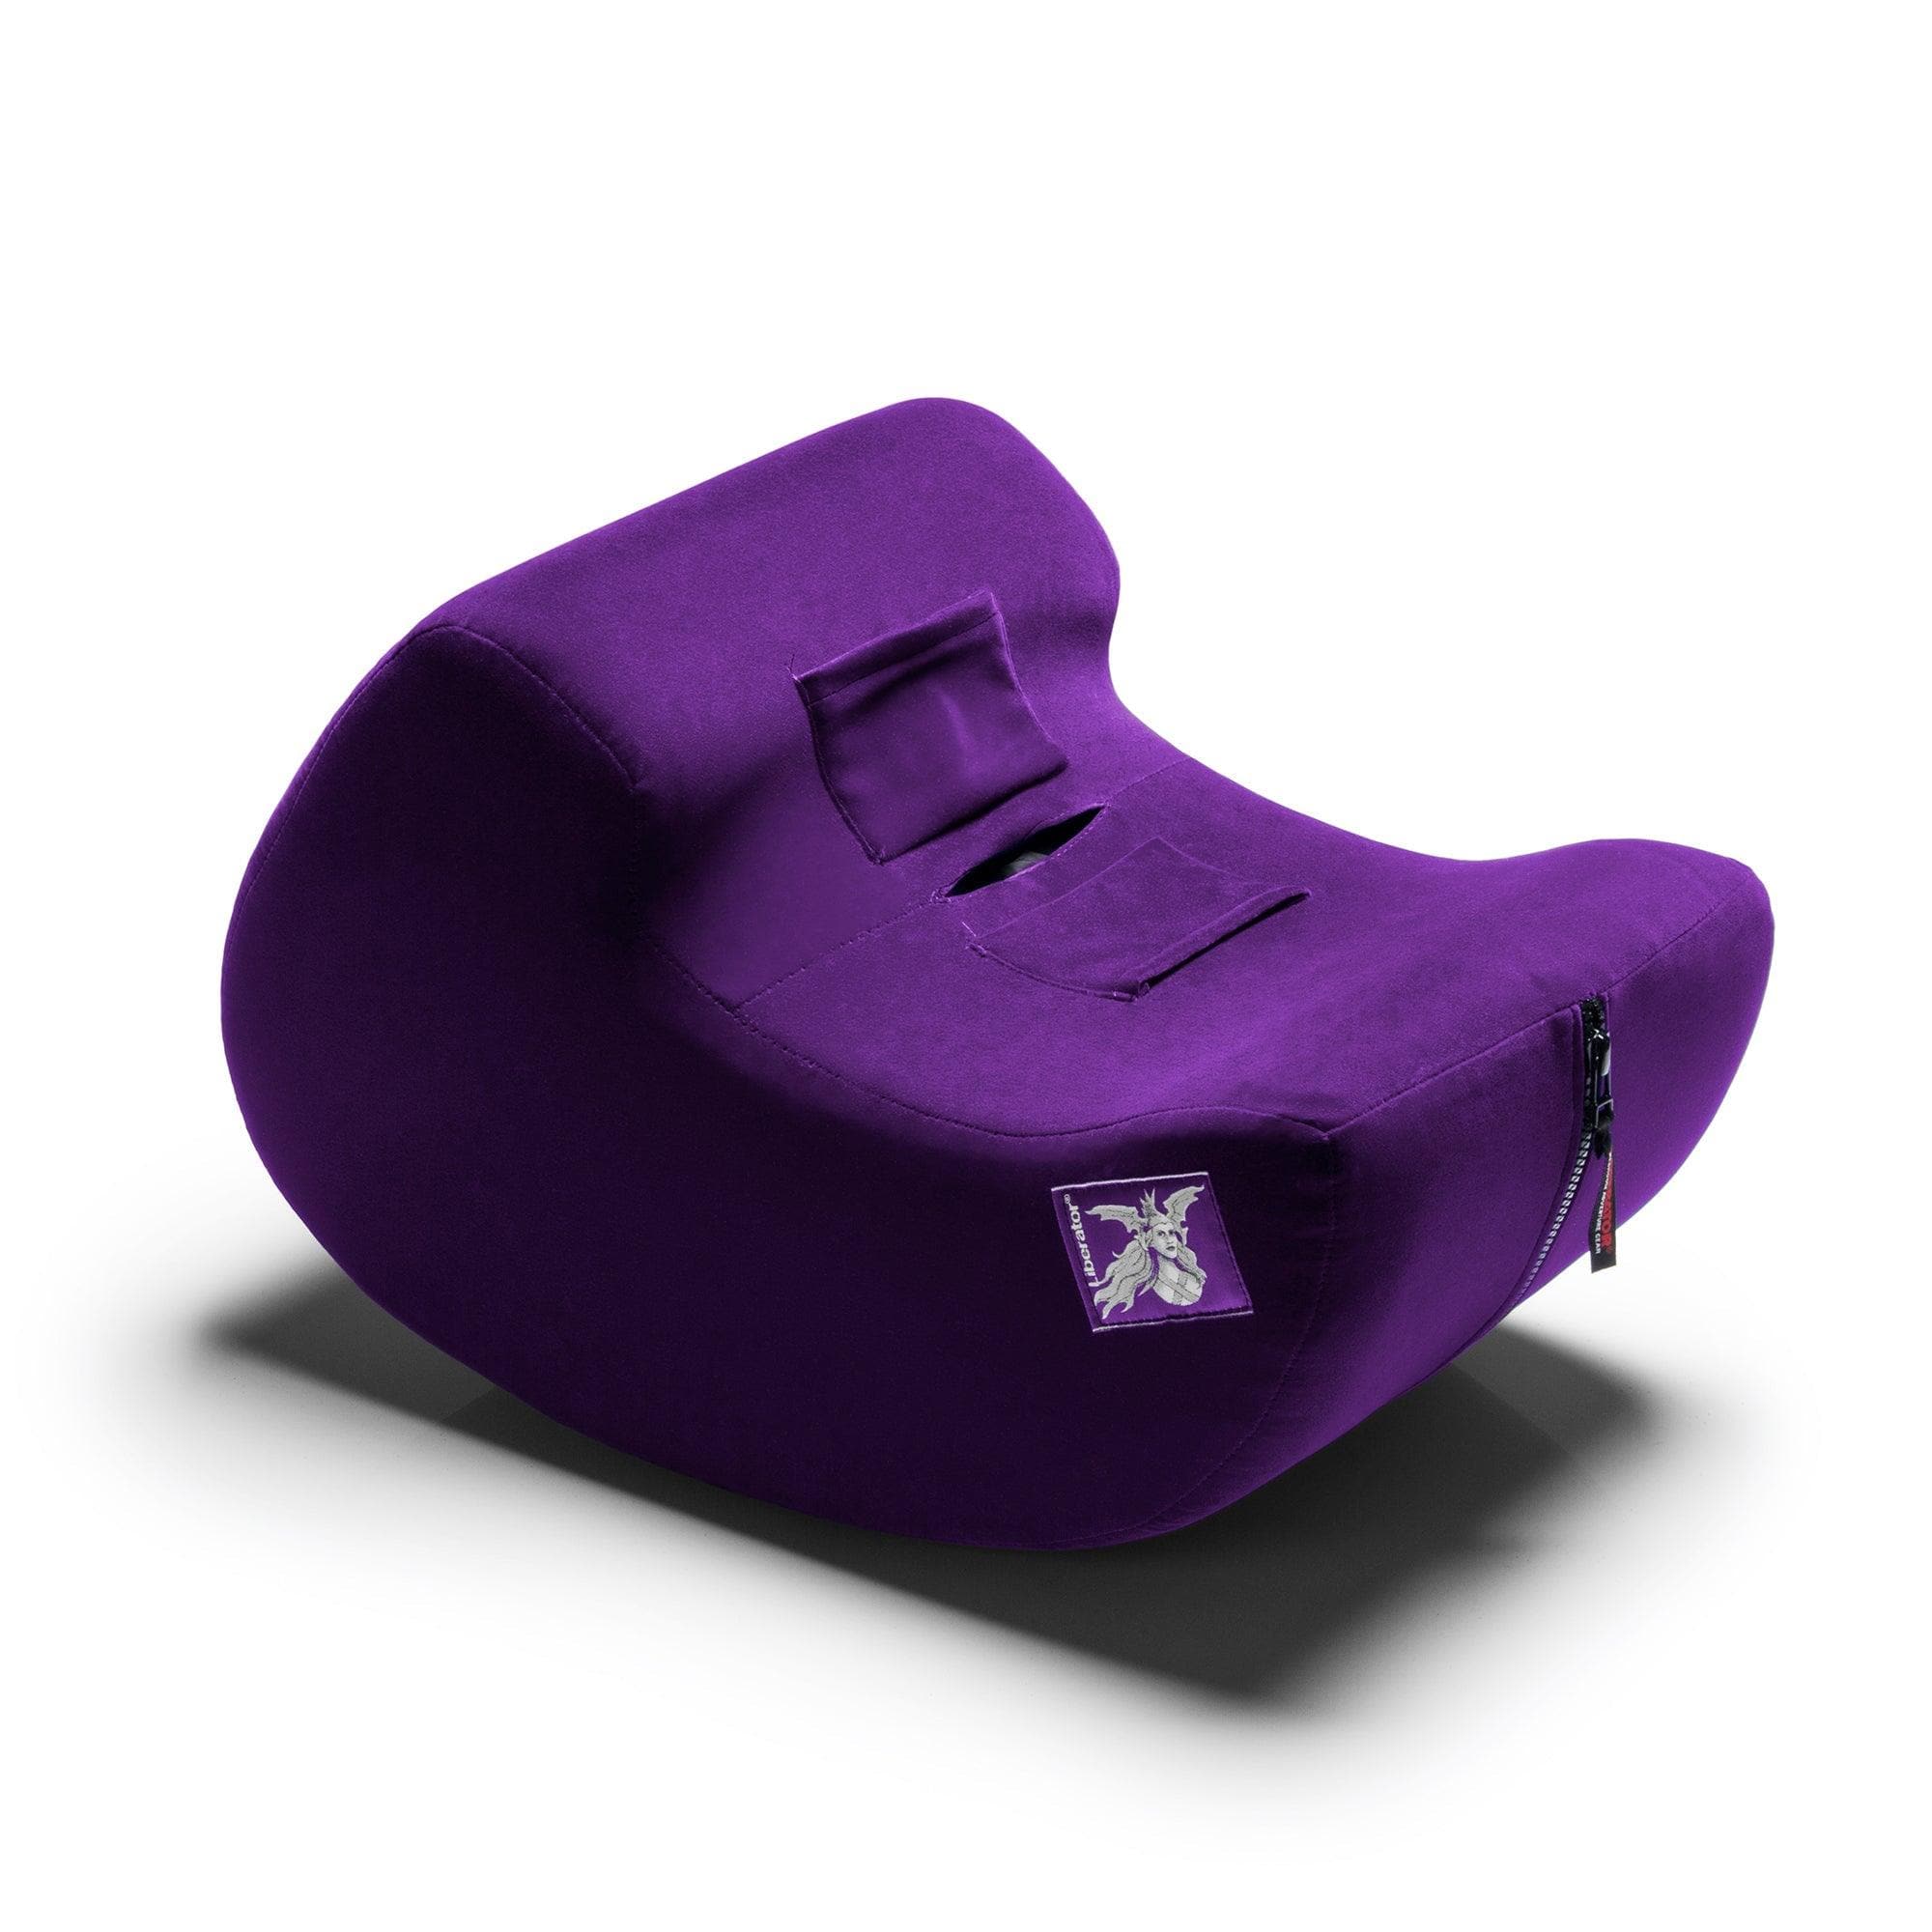 Liberator Pulse Sex Positioning Pillow & Toy Mount with Natural Rocking Sensation & Hands Free Play - Romantic Blessings